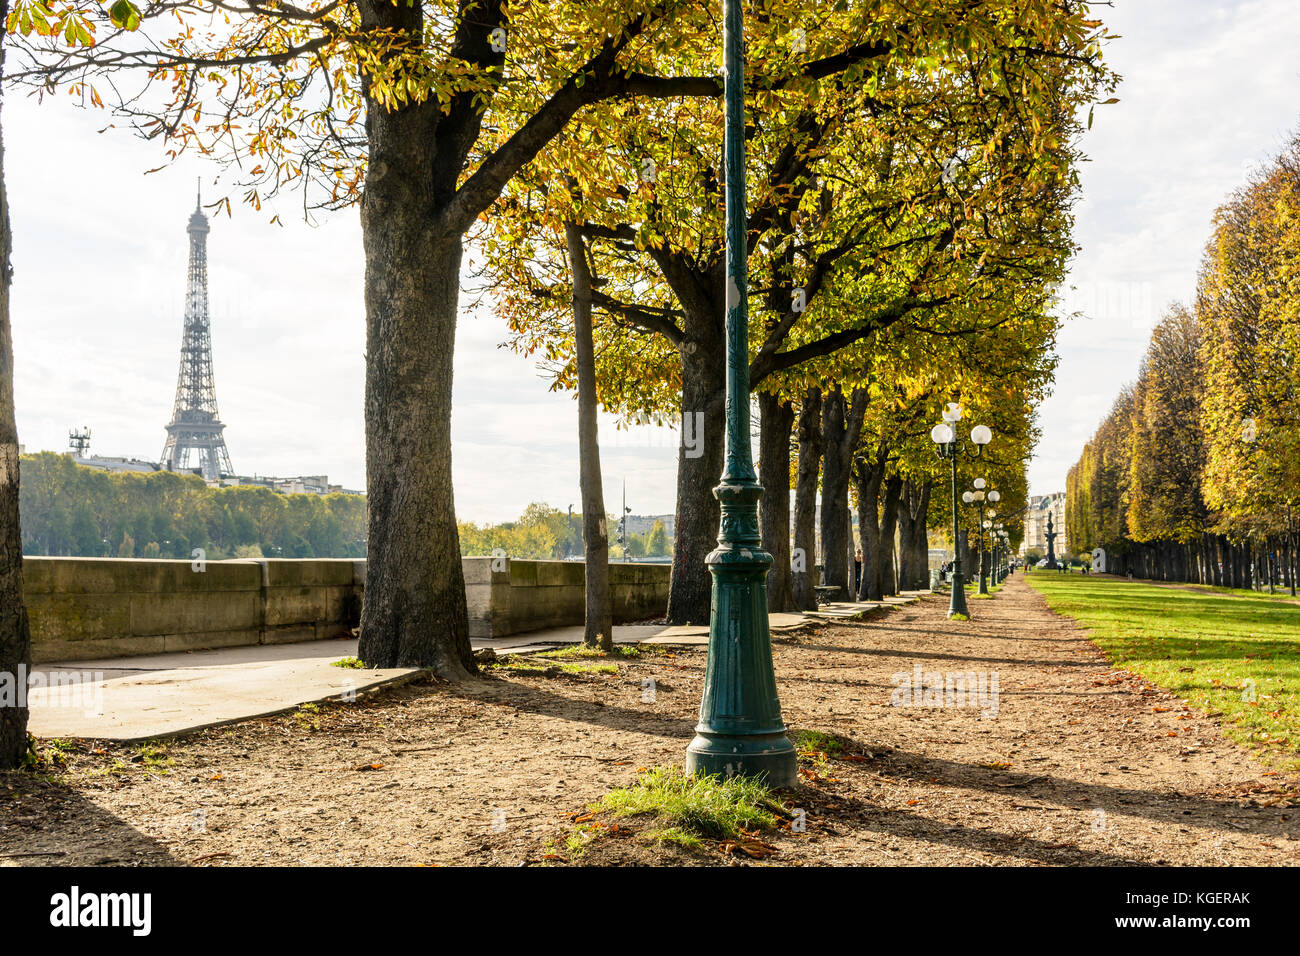 The Eiffel Tower seen between the chestnut trees planted alongside the banks of the river Seine with an old style street light in the foreground. Stock Photo